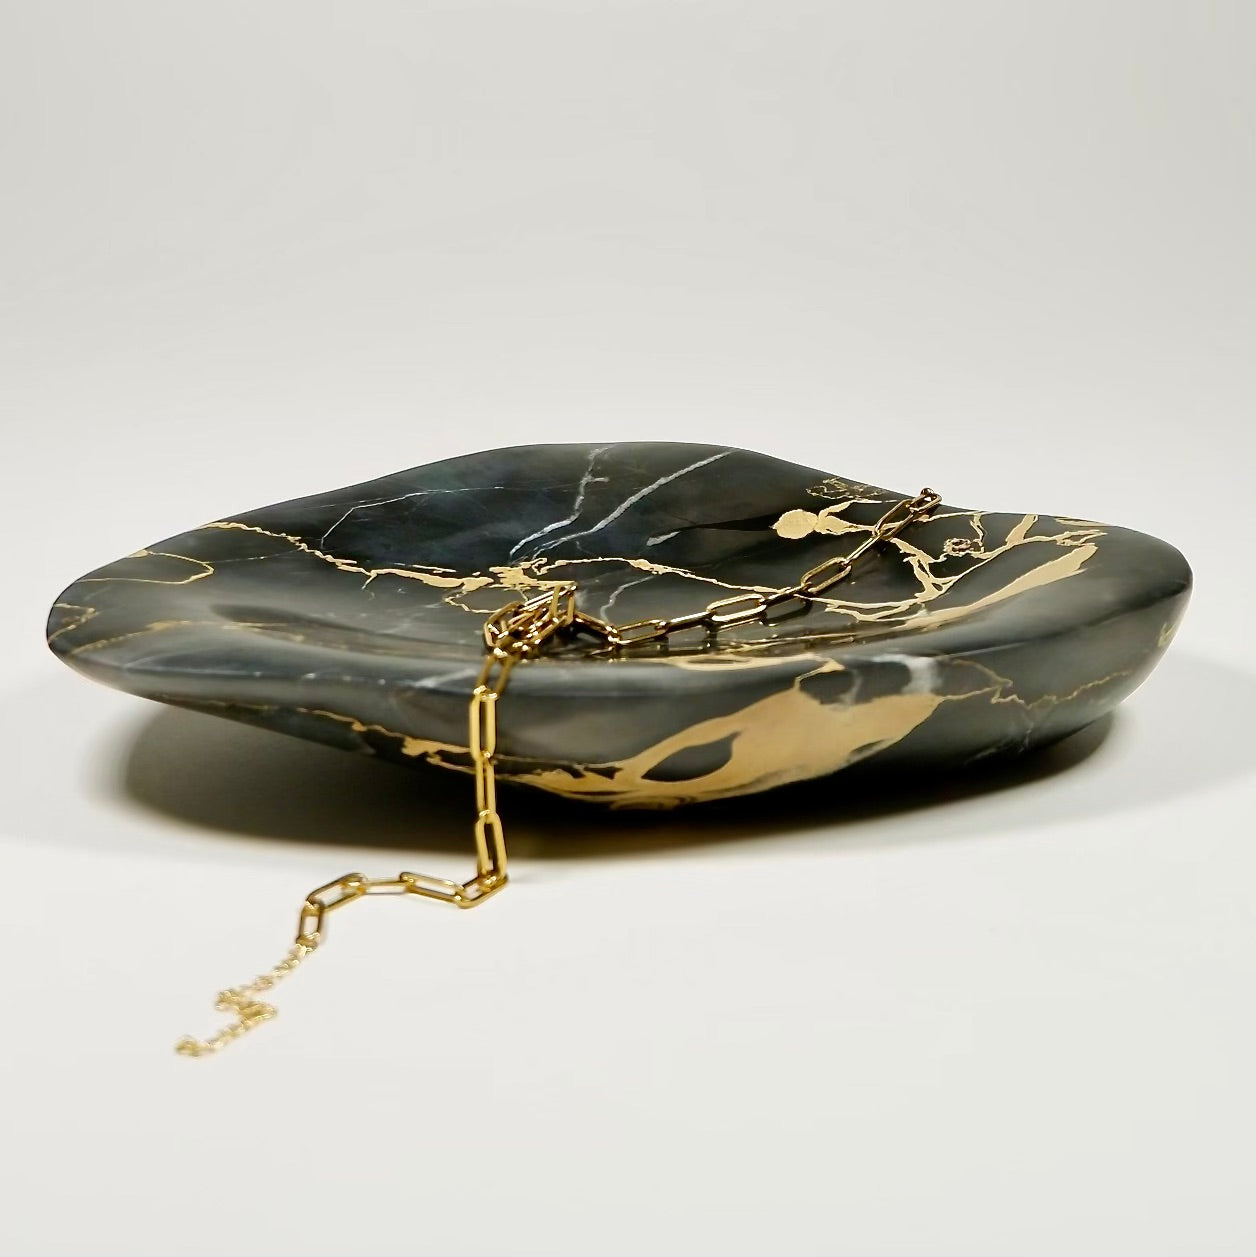 Fathom Stone Art bowl collection features unique hand carved shapes & wonderfully patterned stones from around the world.  This Italian black gold marble is exquisite.  